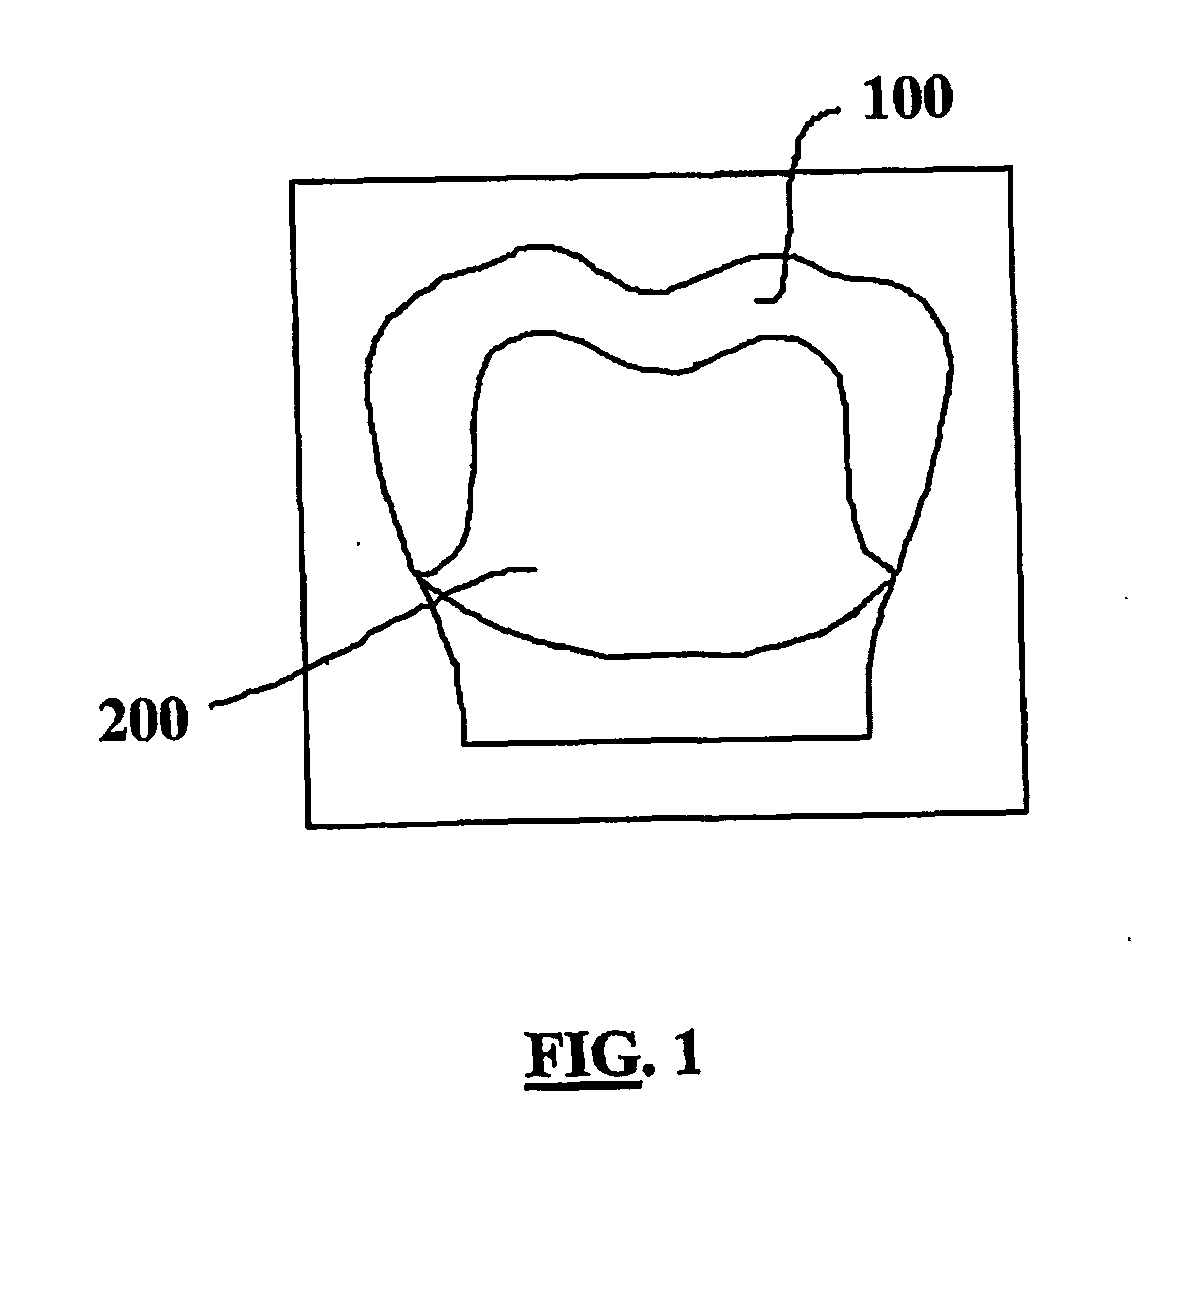 Method of microwave processing ceramics and microwave hybrid heating system for same